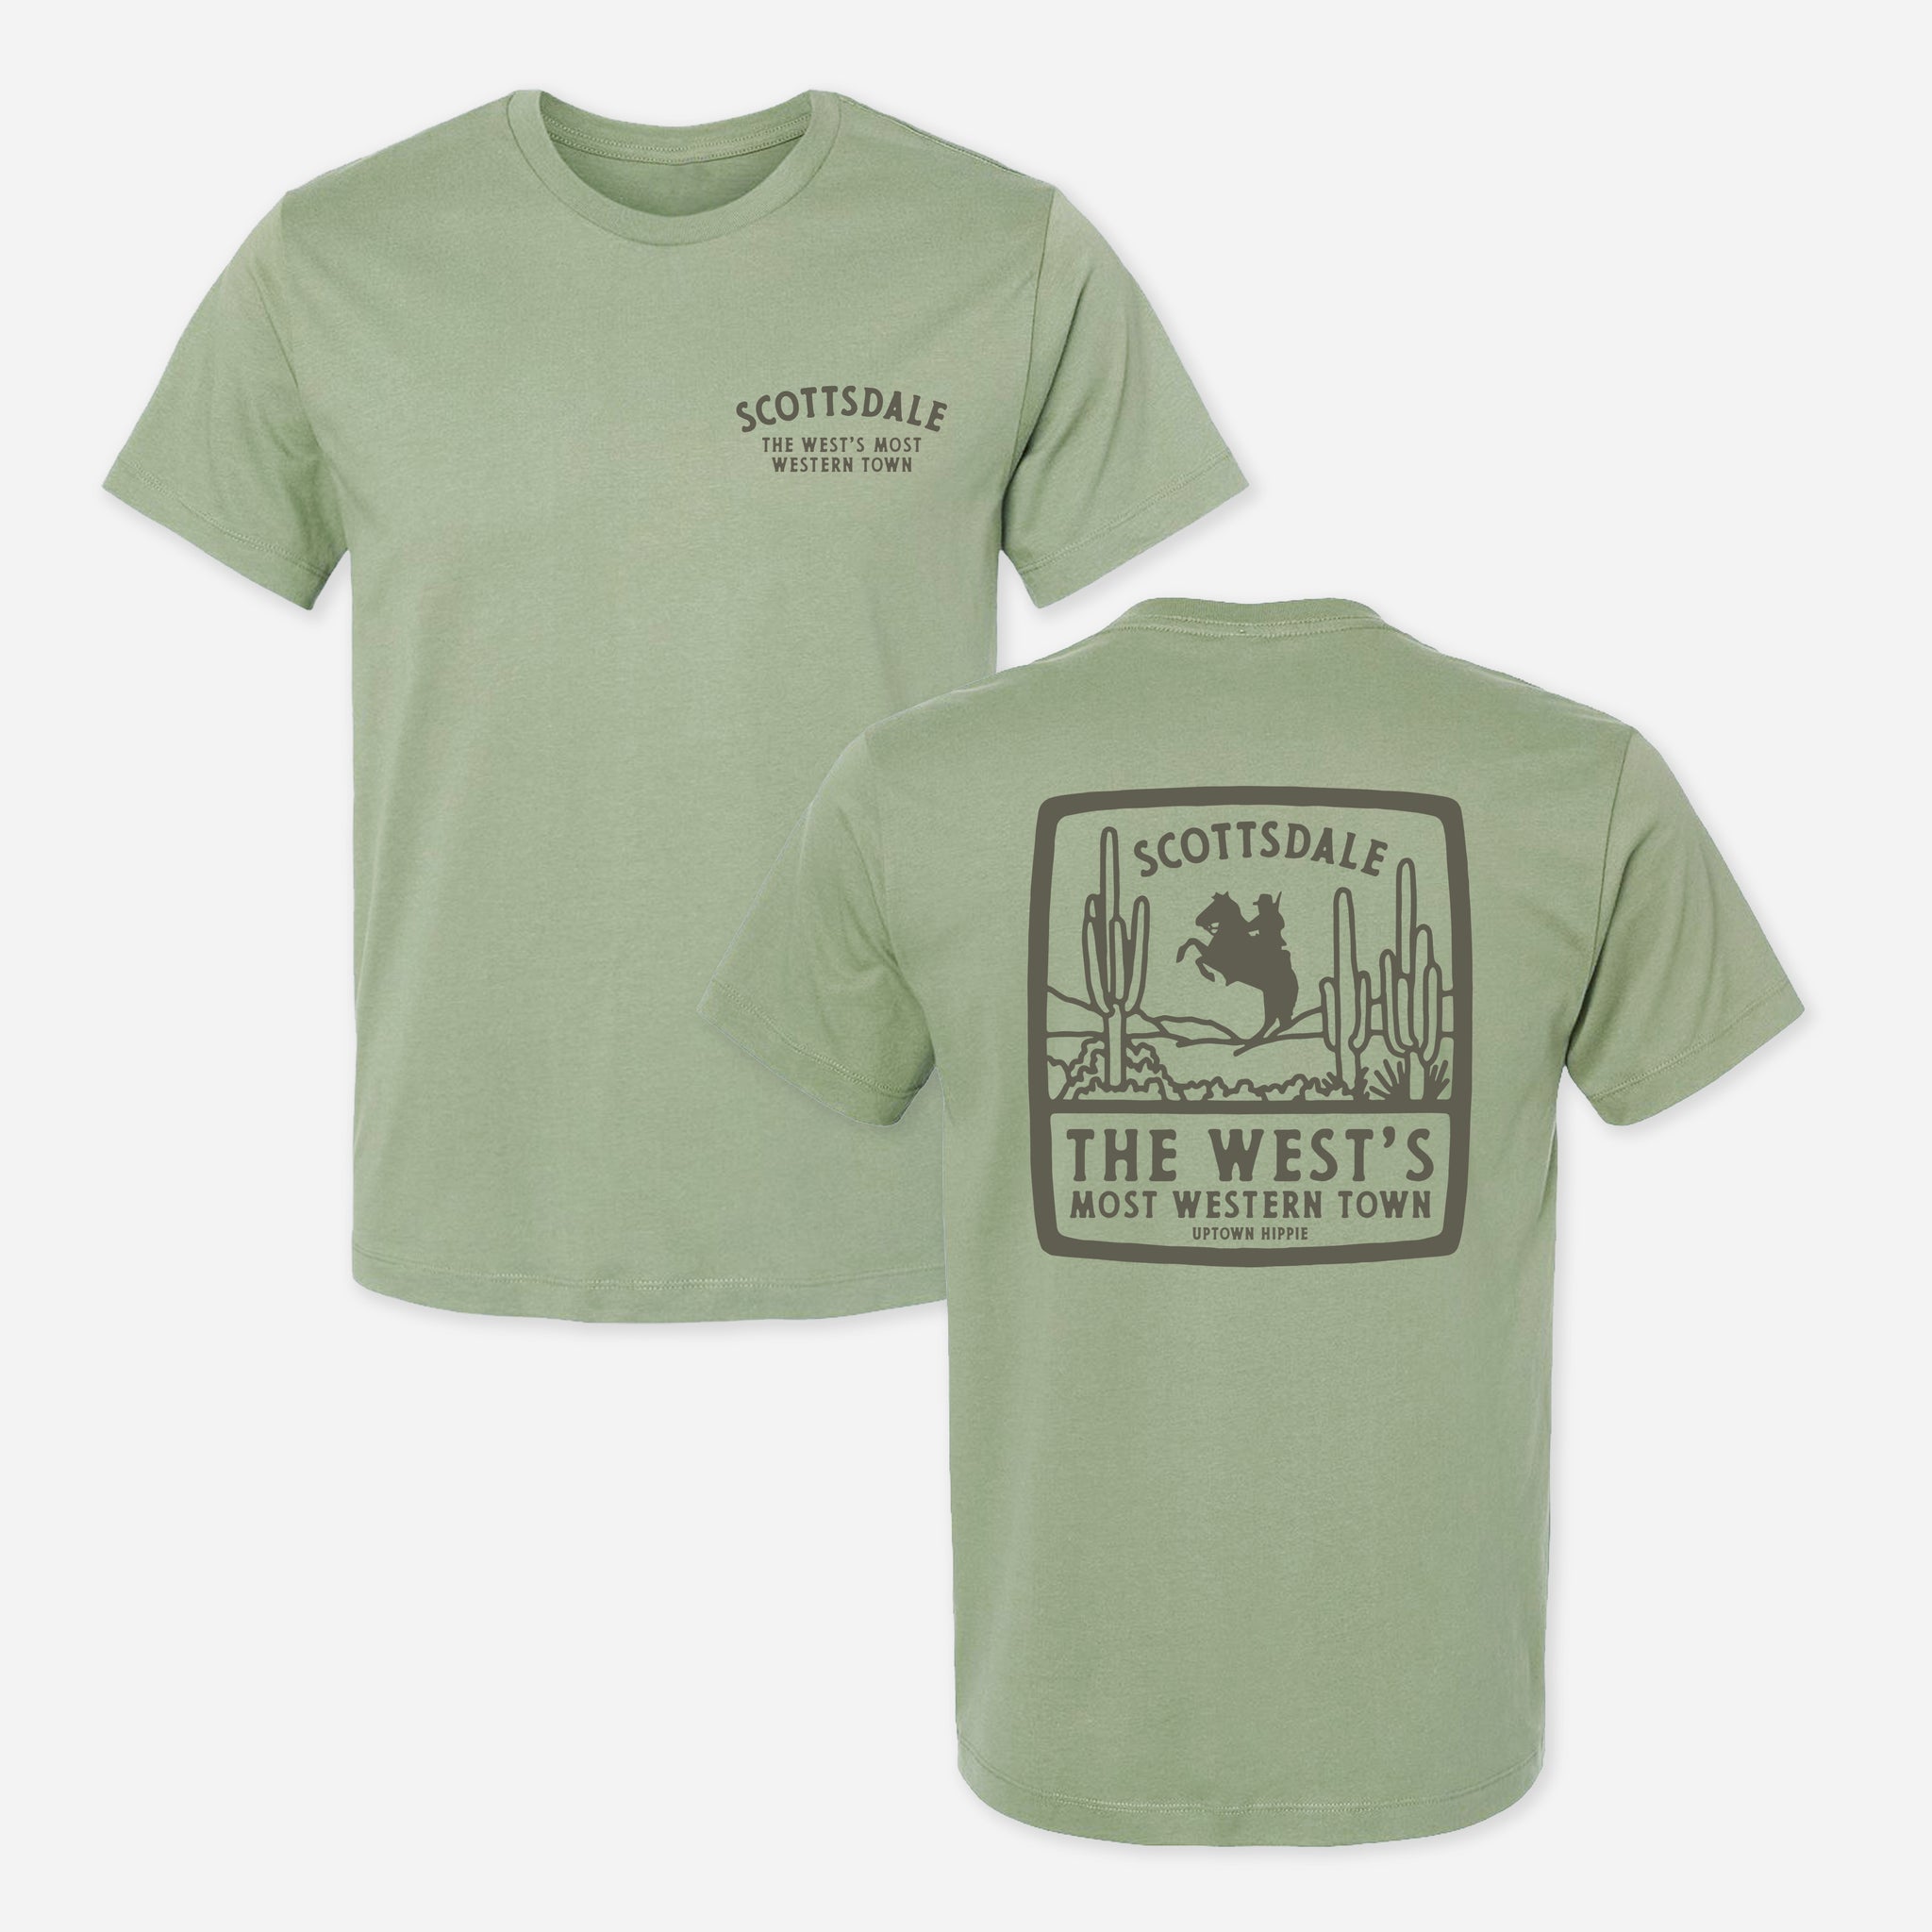 The West's Most Western Town Shirt (Green)